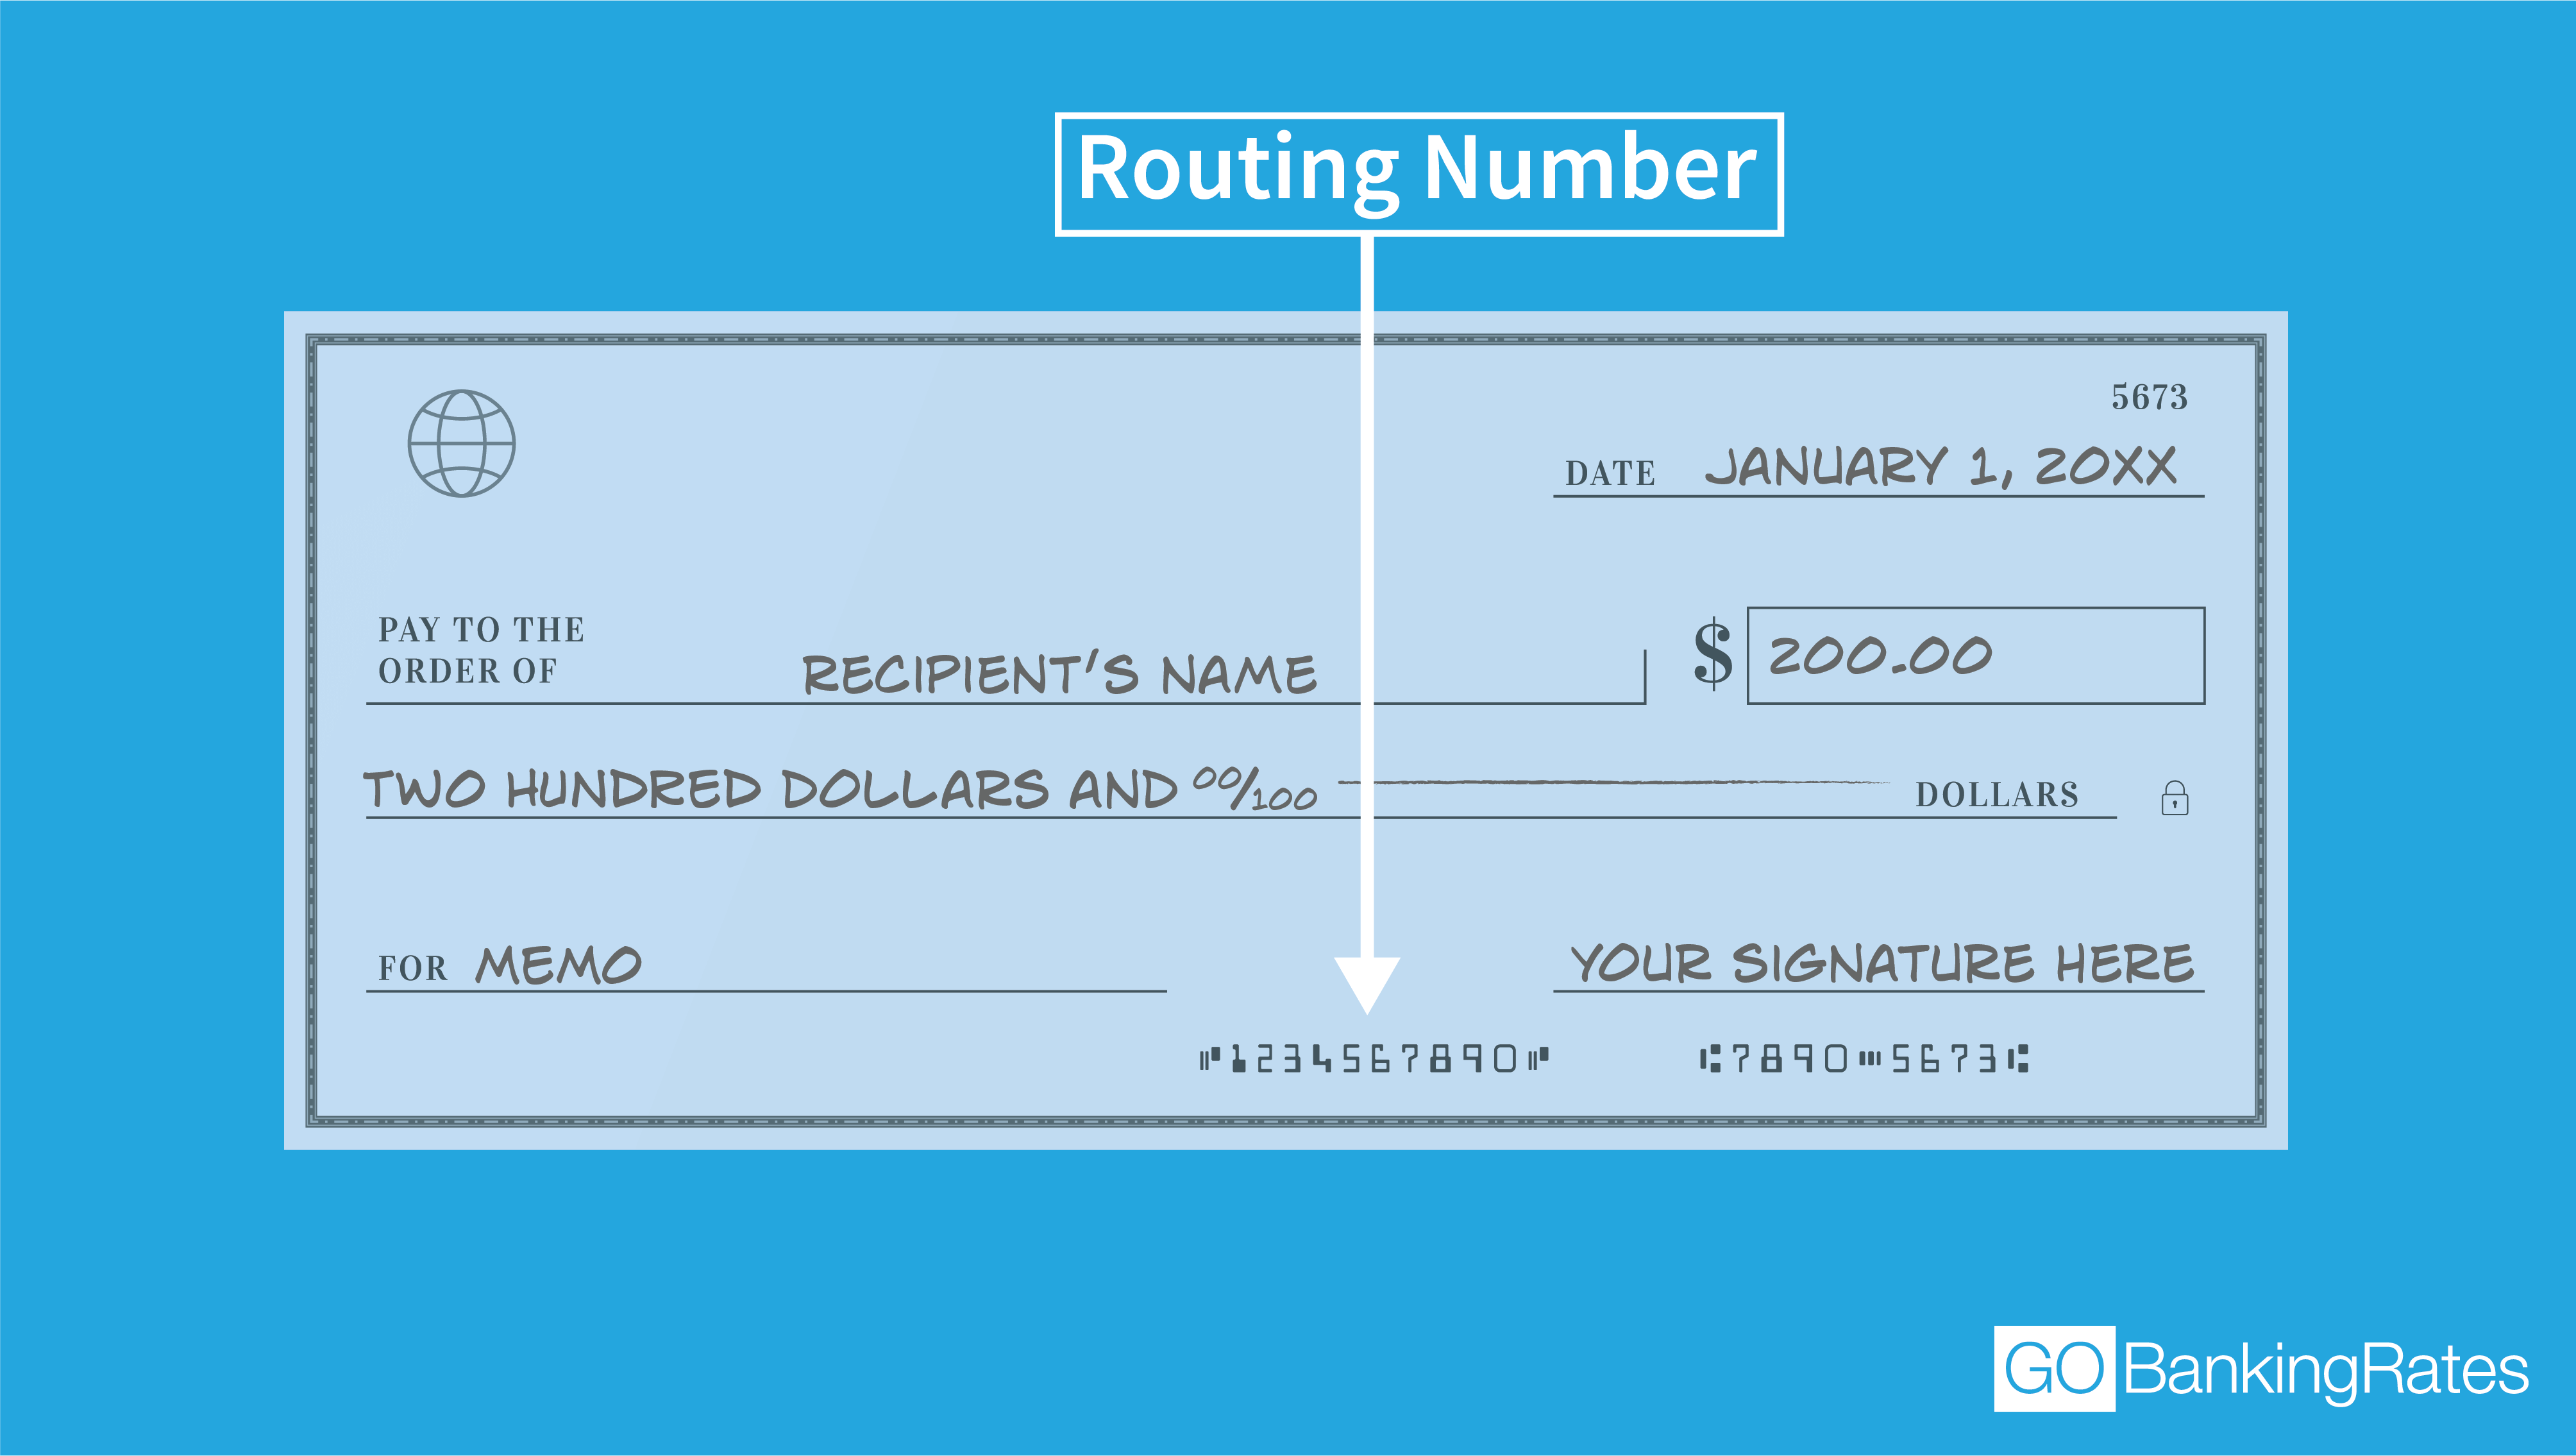 Account number routing number. ABA routing number. Bank routing number. Ach routing number что это. Recipients name